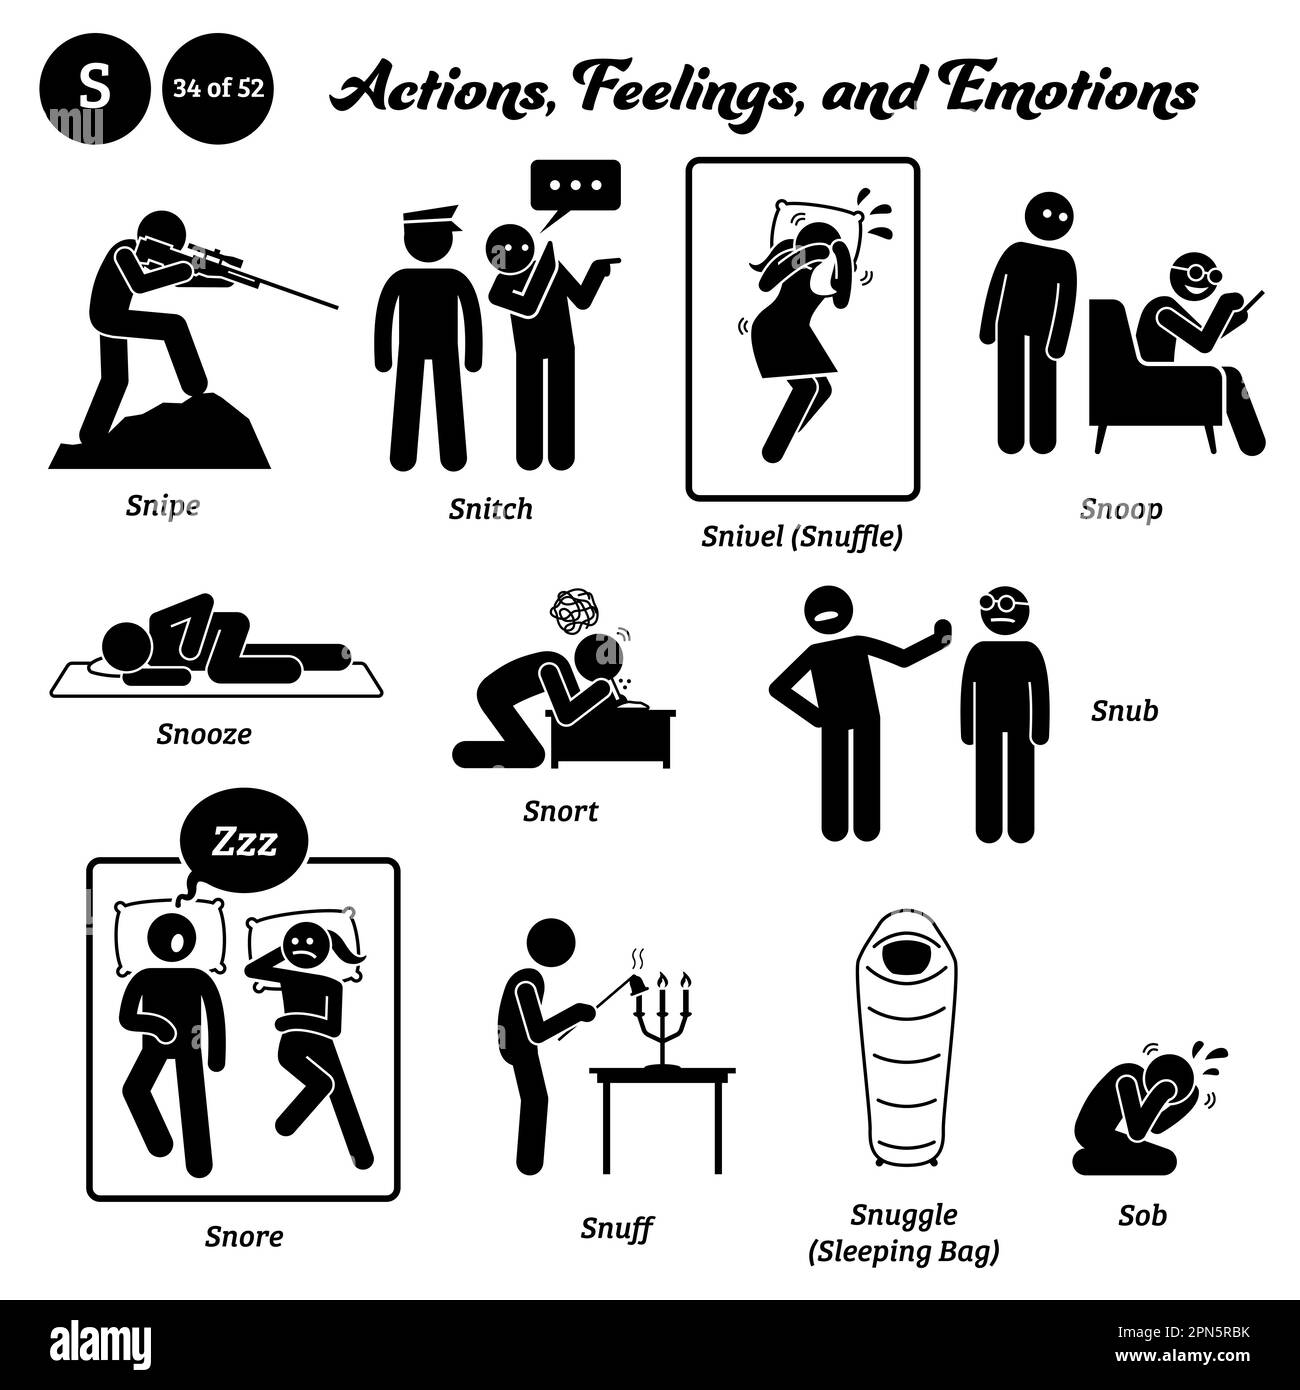 Stick figure human people man action, feelings, and emotions icons alphabet S. Snipe, snitch, snivel, snuffle, snoop, snooze, snort, snub, snore, snuf Stock Vector